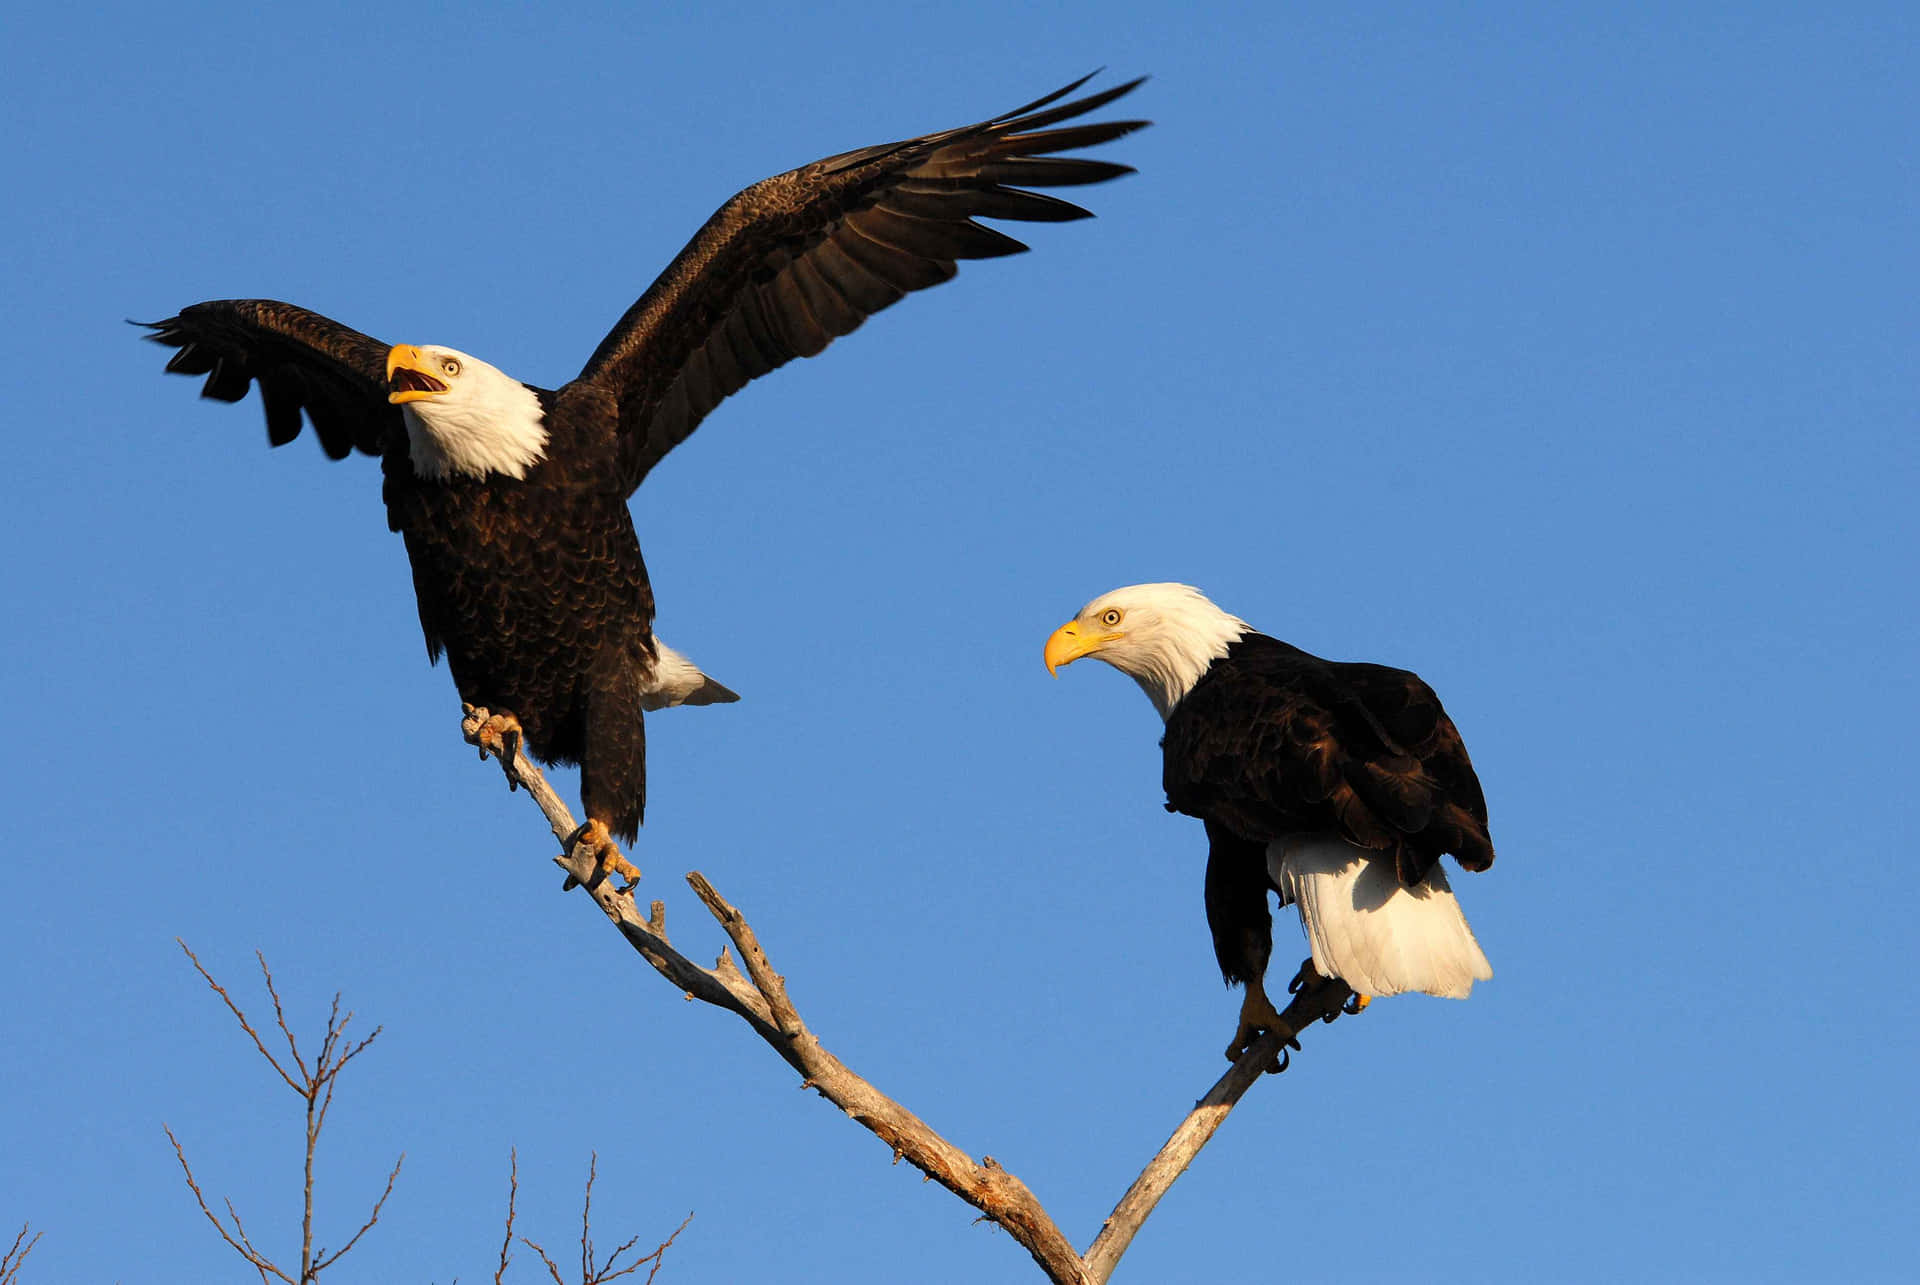 The Majestic Eagles Soaring Through the Skies